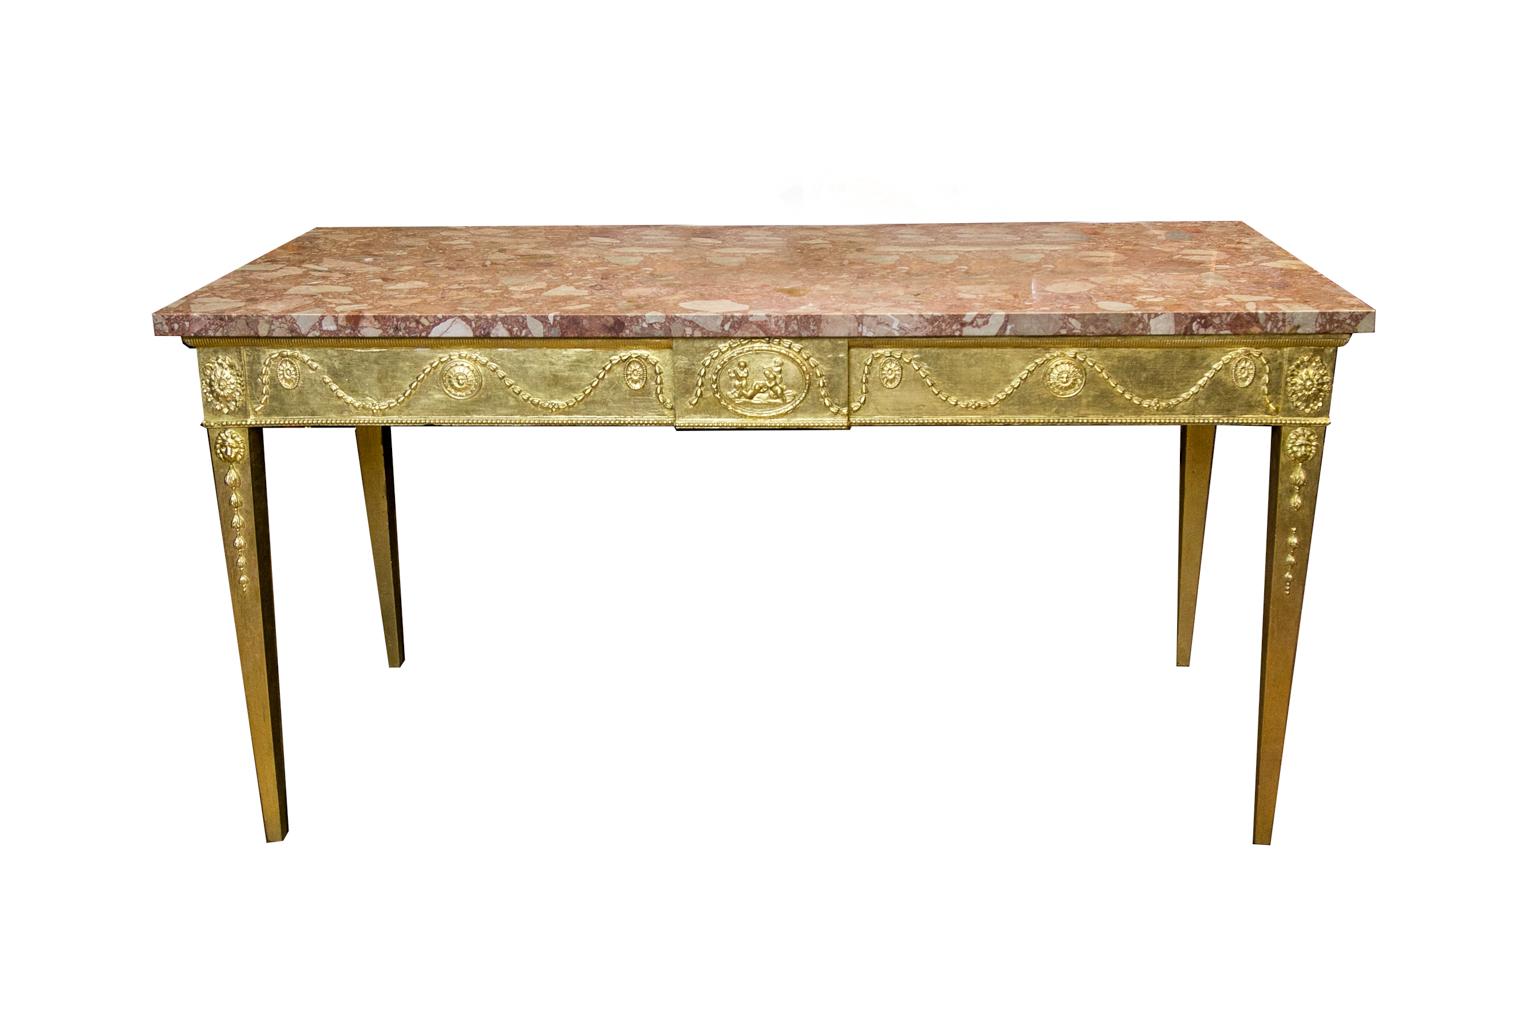 The top of this gilt console table has a straight rectangular marble (later). The apron has carved bellflower swags on three sides and a center cartouche with children playing. The lower apron has a repeating carved bead. The legs have a carved